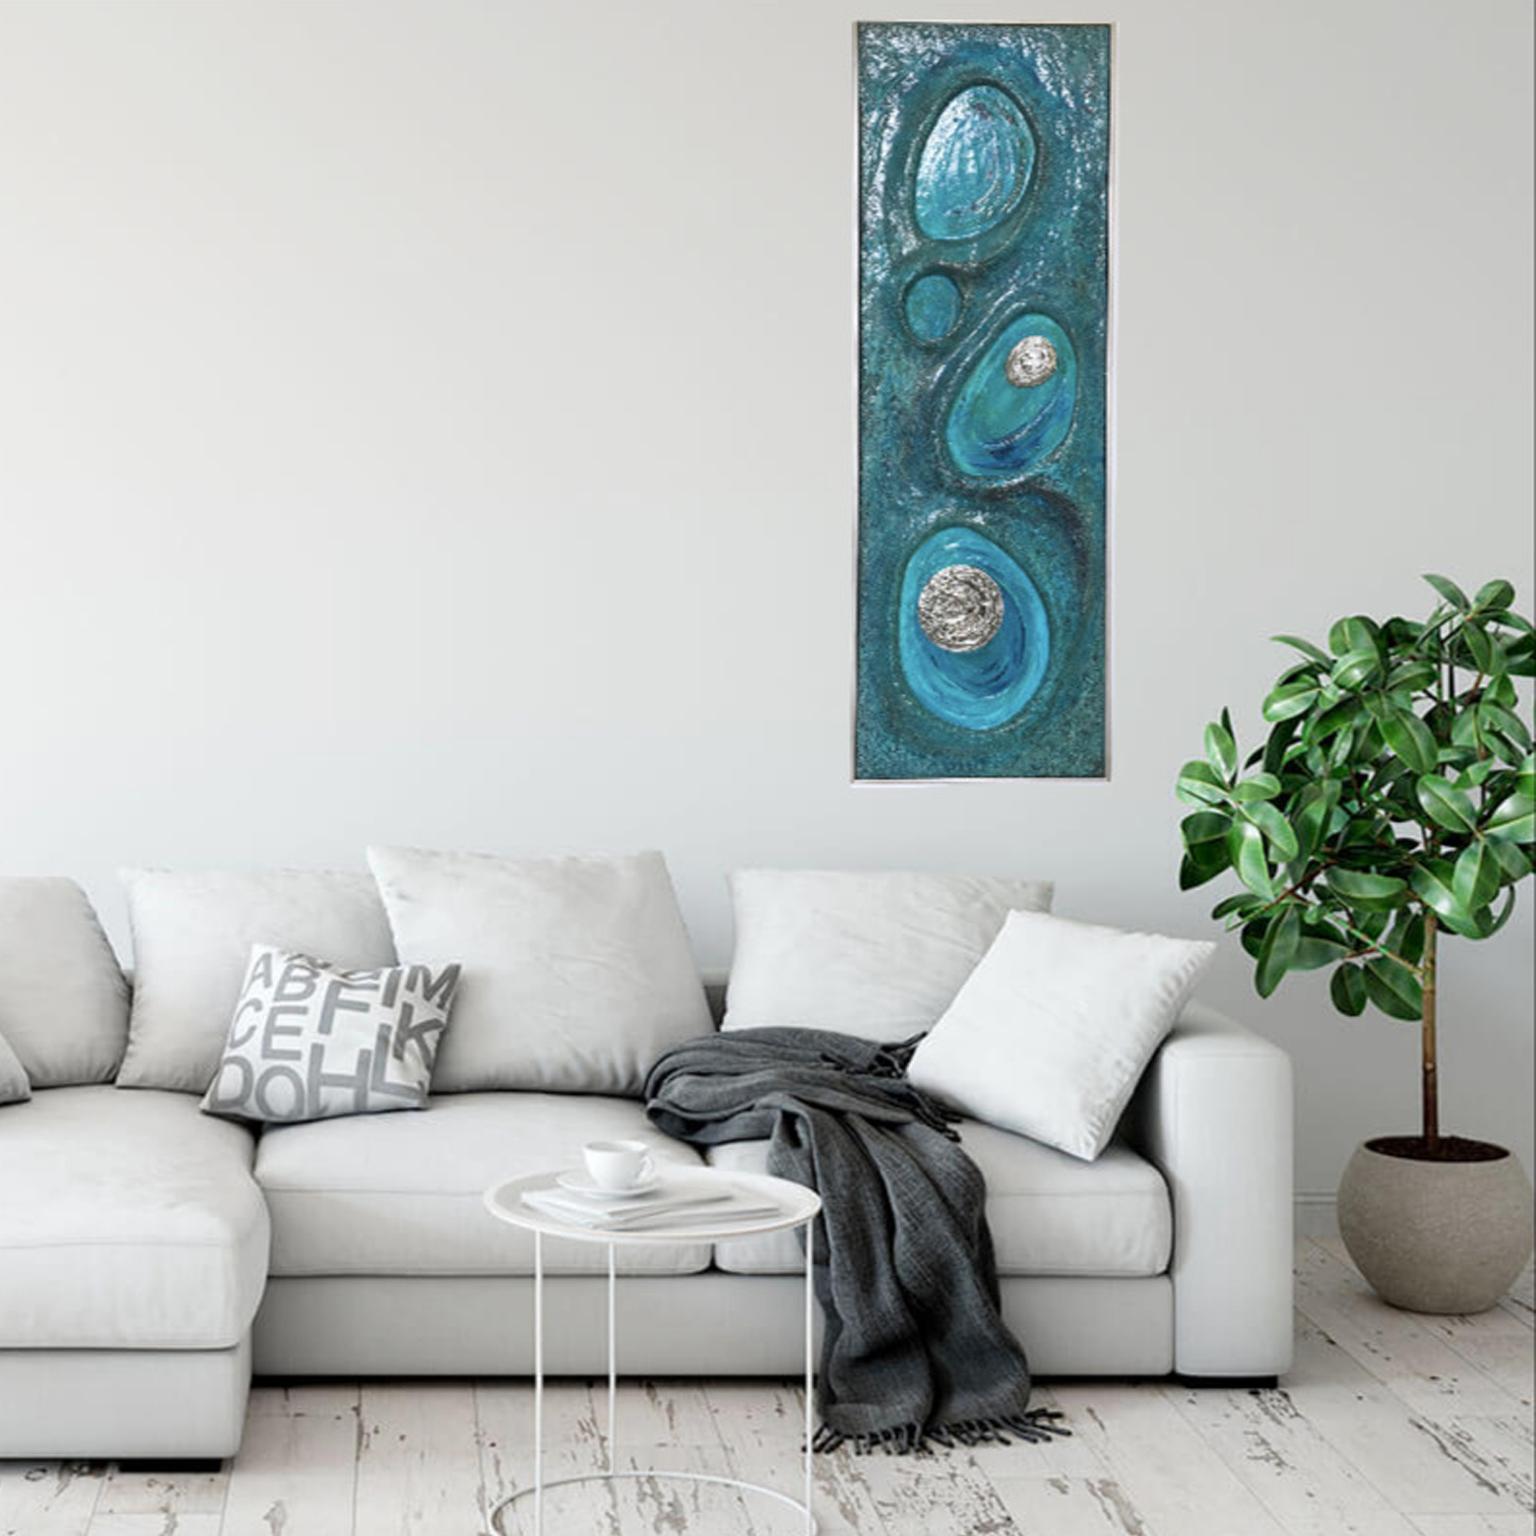 Psychedelic Turquoise Acrylic Resin Art Wall Sculpture Panel by Lorraine Stelzer For Sale 11